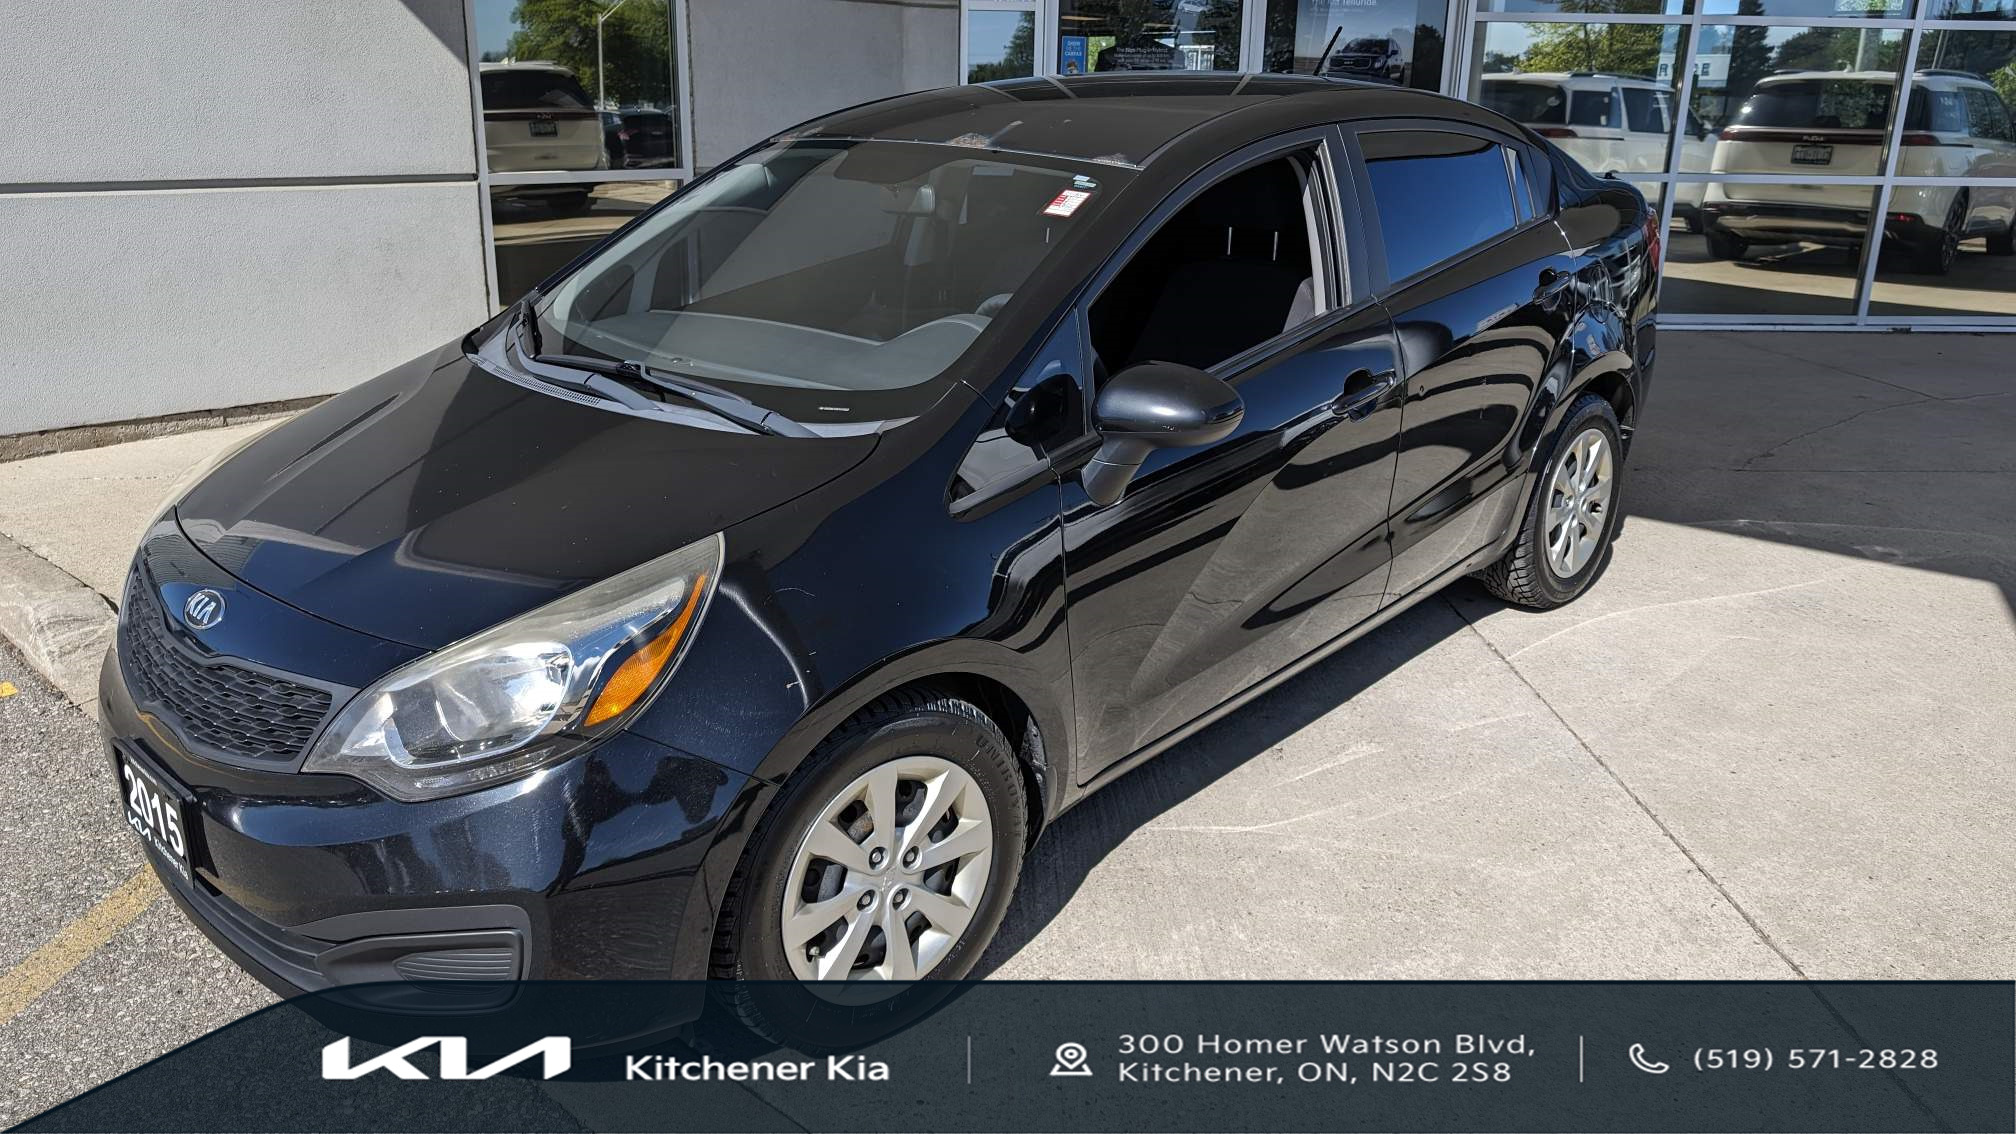 2015 Kia Rio LX+ Fully Certified, No Accidents!